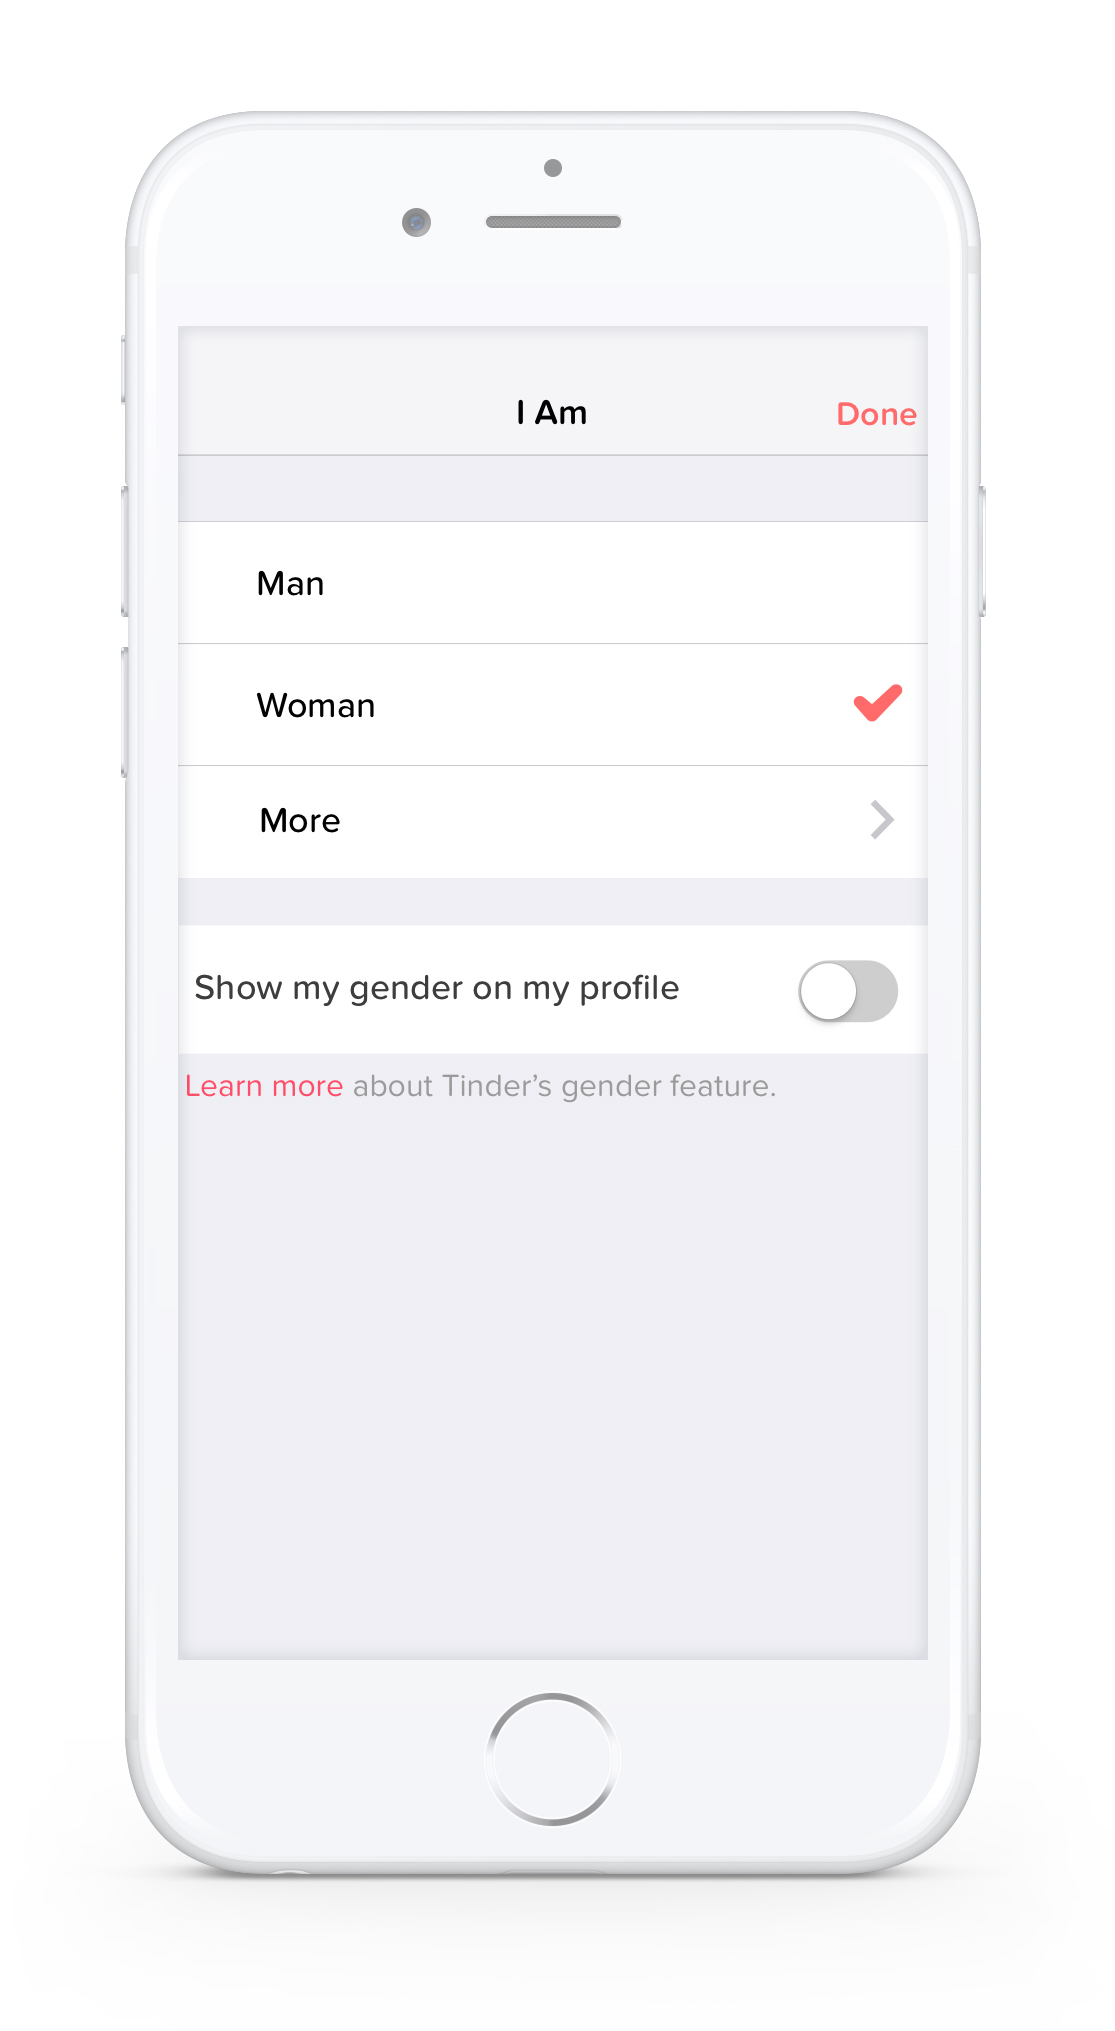 Transgender on Tinder? Now You Can Identify Yourself That Way